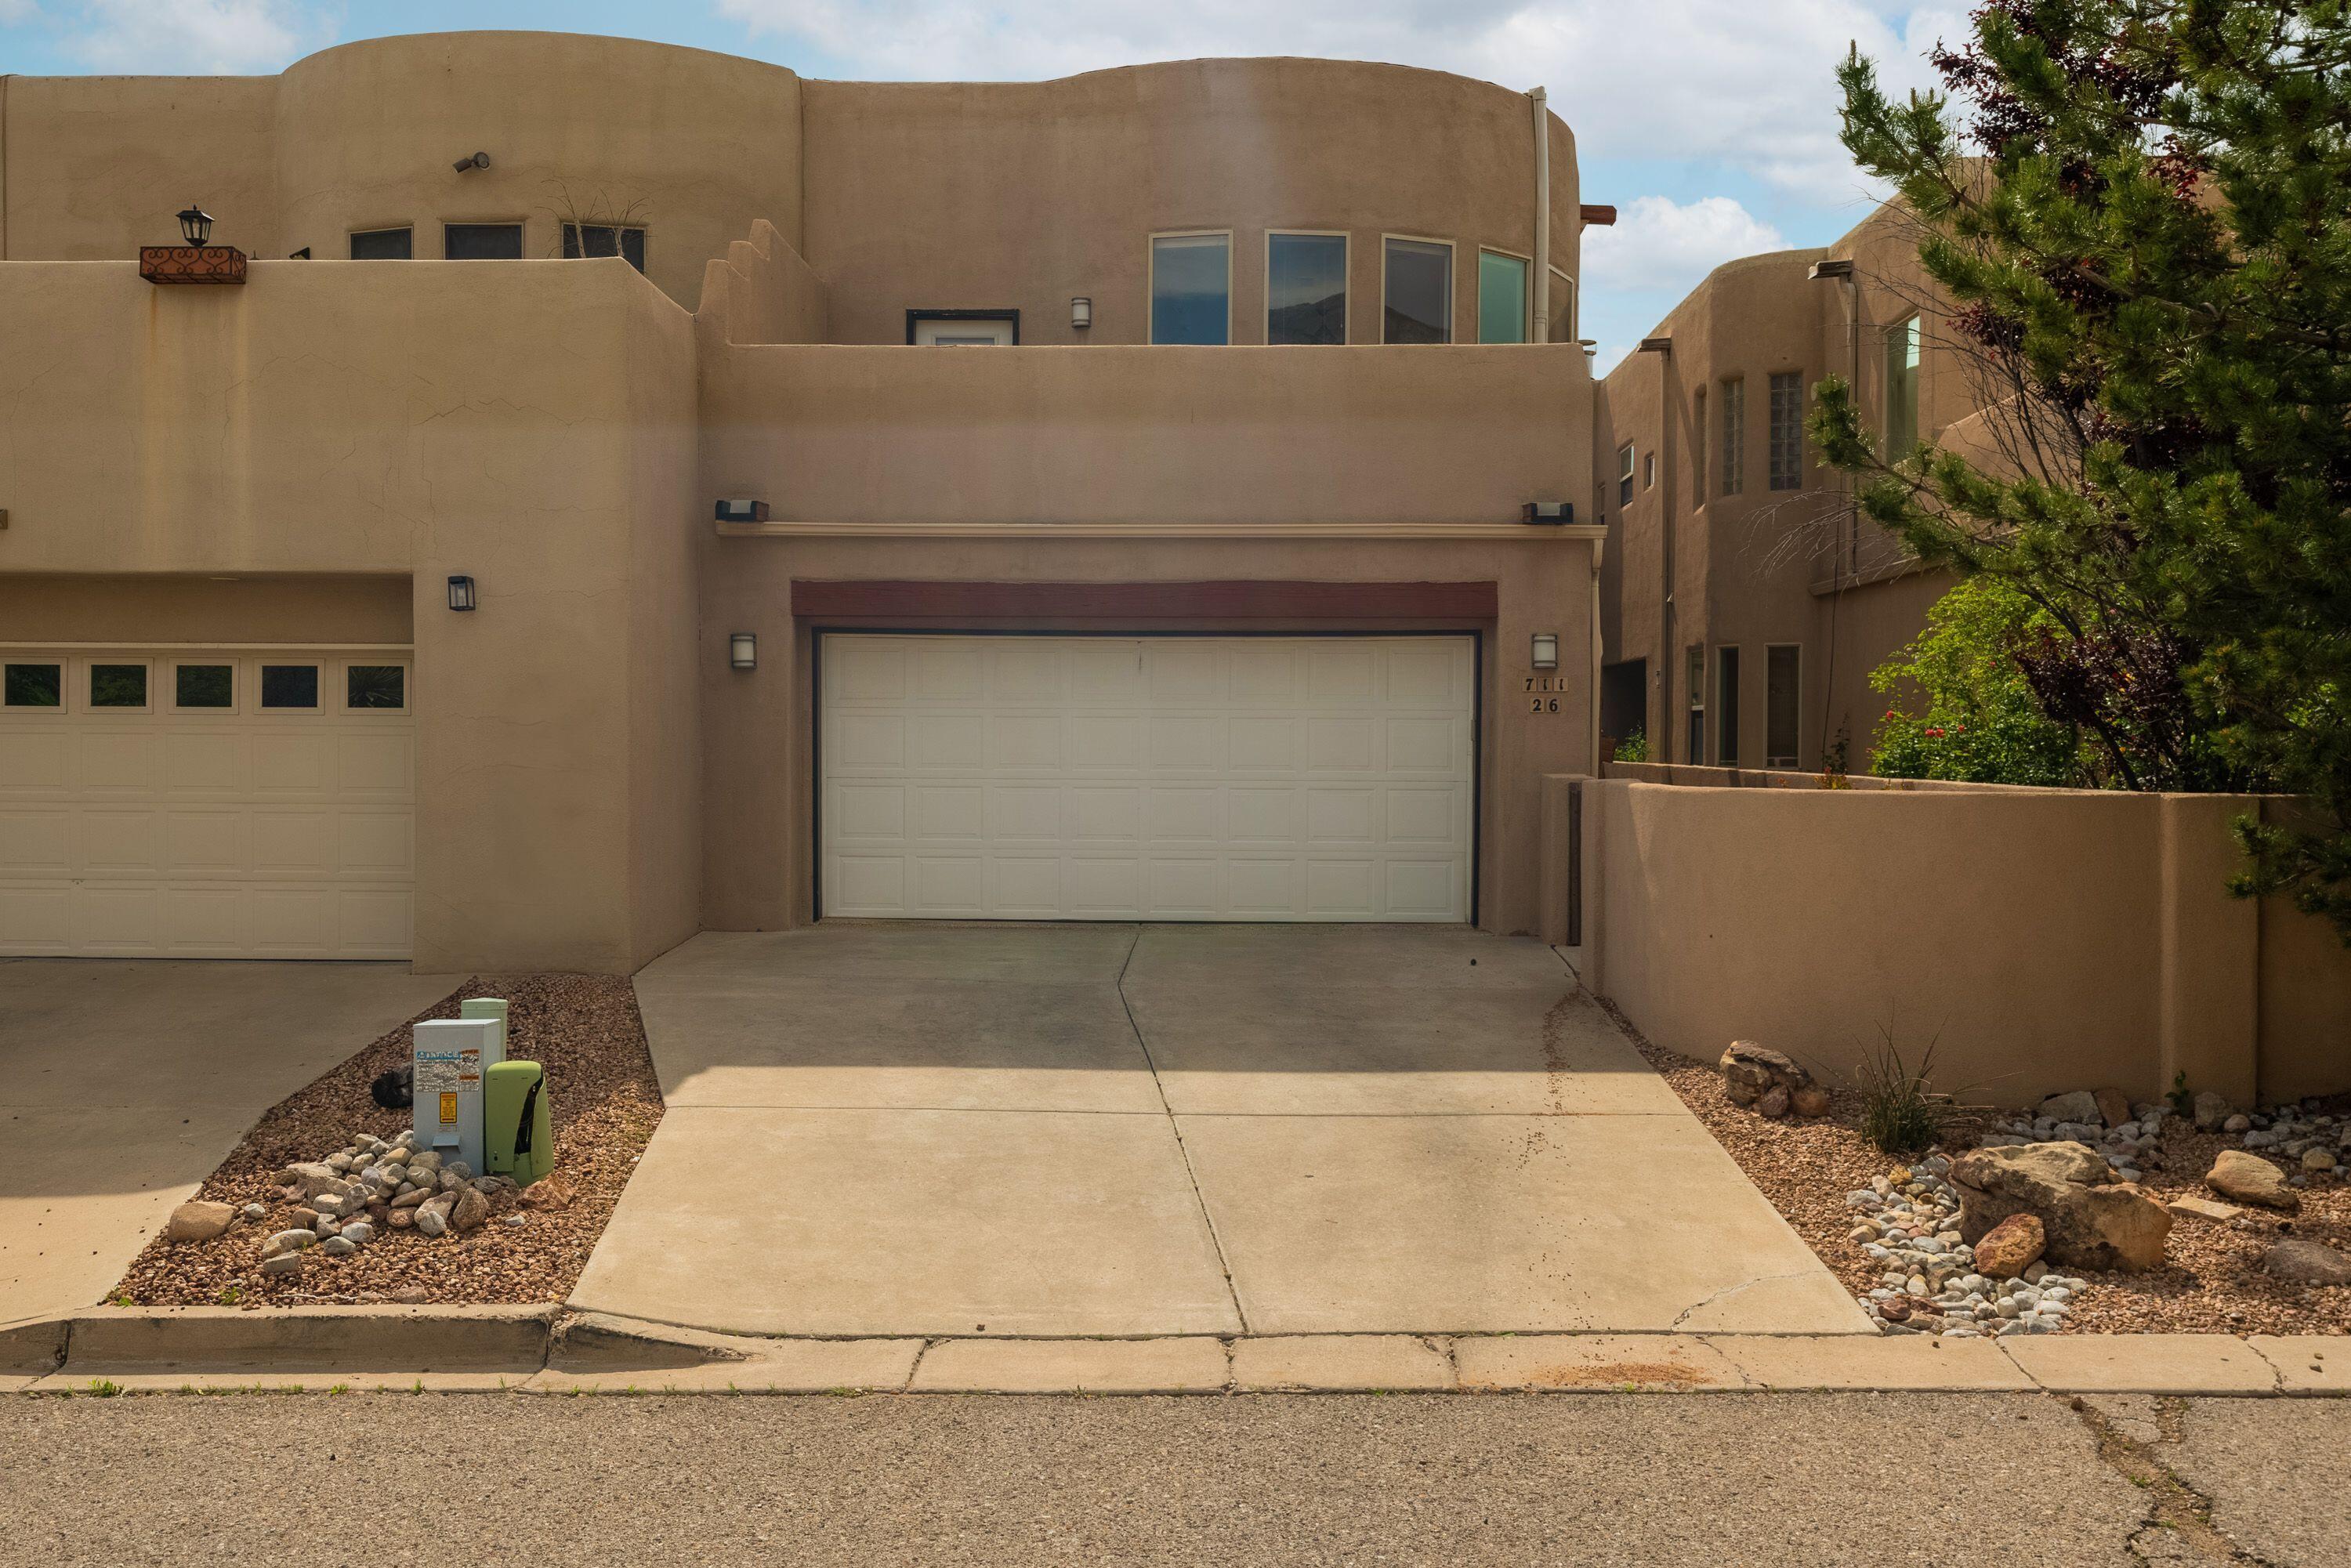 Exceptional Sandia Heights townhome.   The spacious living area greets you with large windows that frame the Sandia Mountains. Plenty of natural light throughout the home provides a light open feeling.  The Primary bedroom located on the upper floor has a balcony with amazing views of the city.   There are many special features include: a Smart Home with over 20 components such as switches, outlets, and fireplaces that can be programmed & voice activated with Alexa or similar.  This home also has a small elevator to carry your food and goods upstairs from the laundry room.  This is a must see.